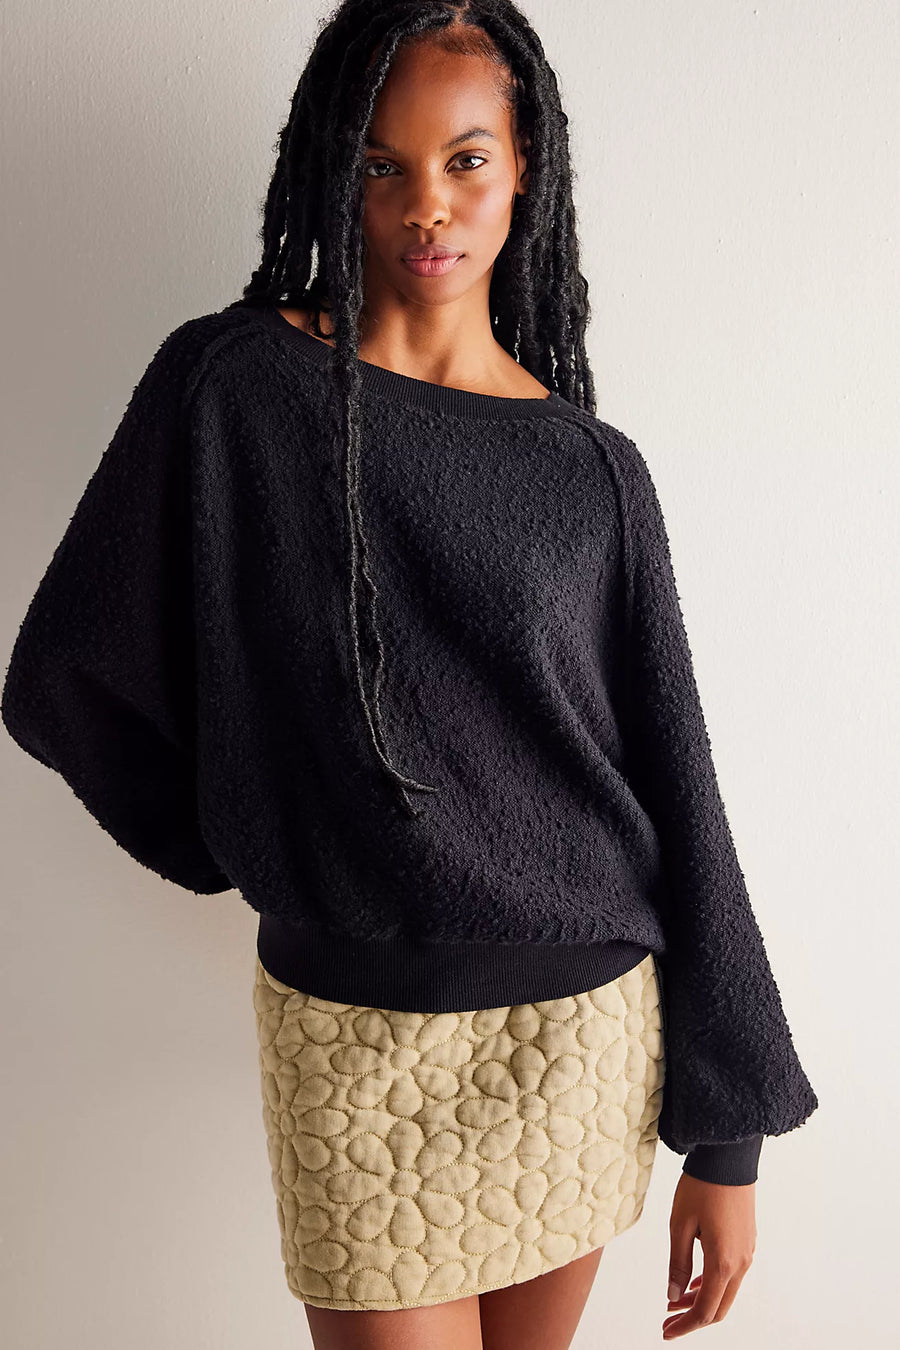 Free People Found My Friend Pullover - Black